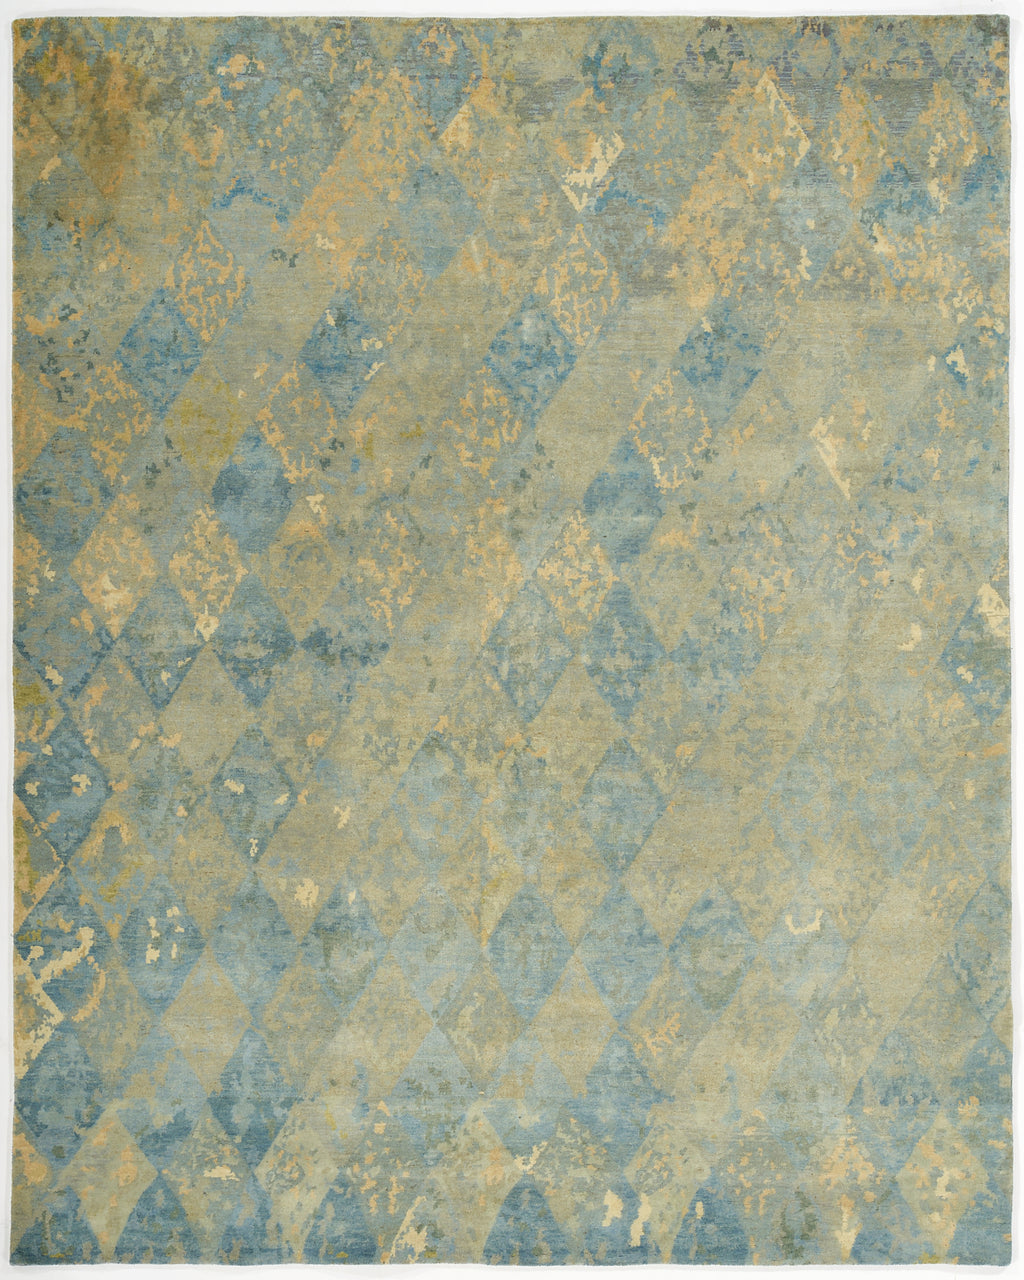 Antique Damask - In Stock